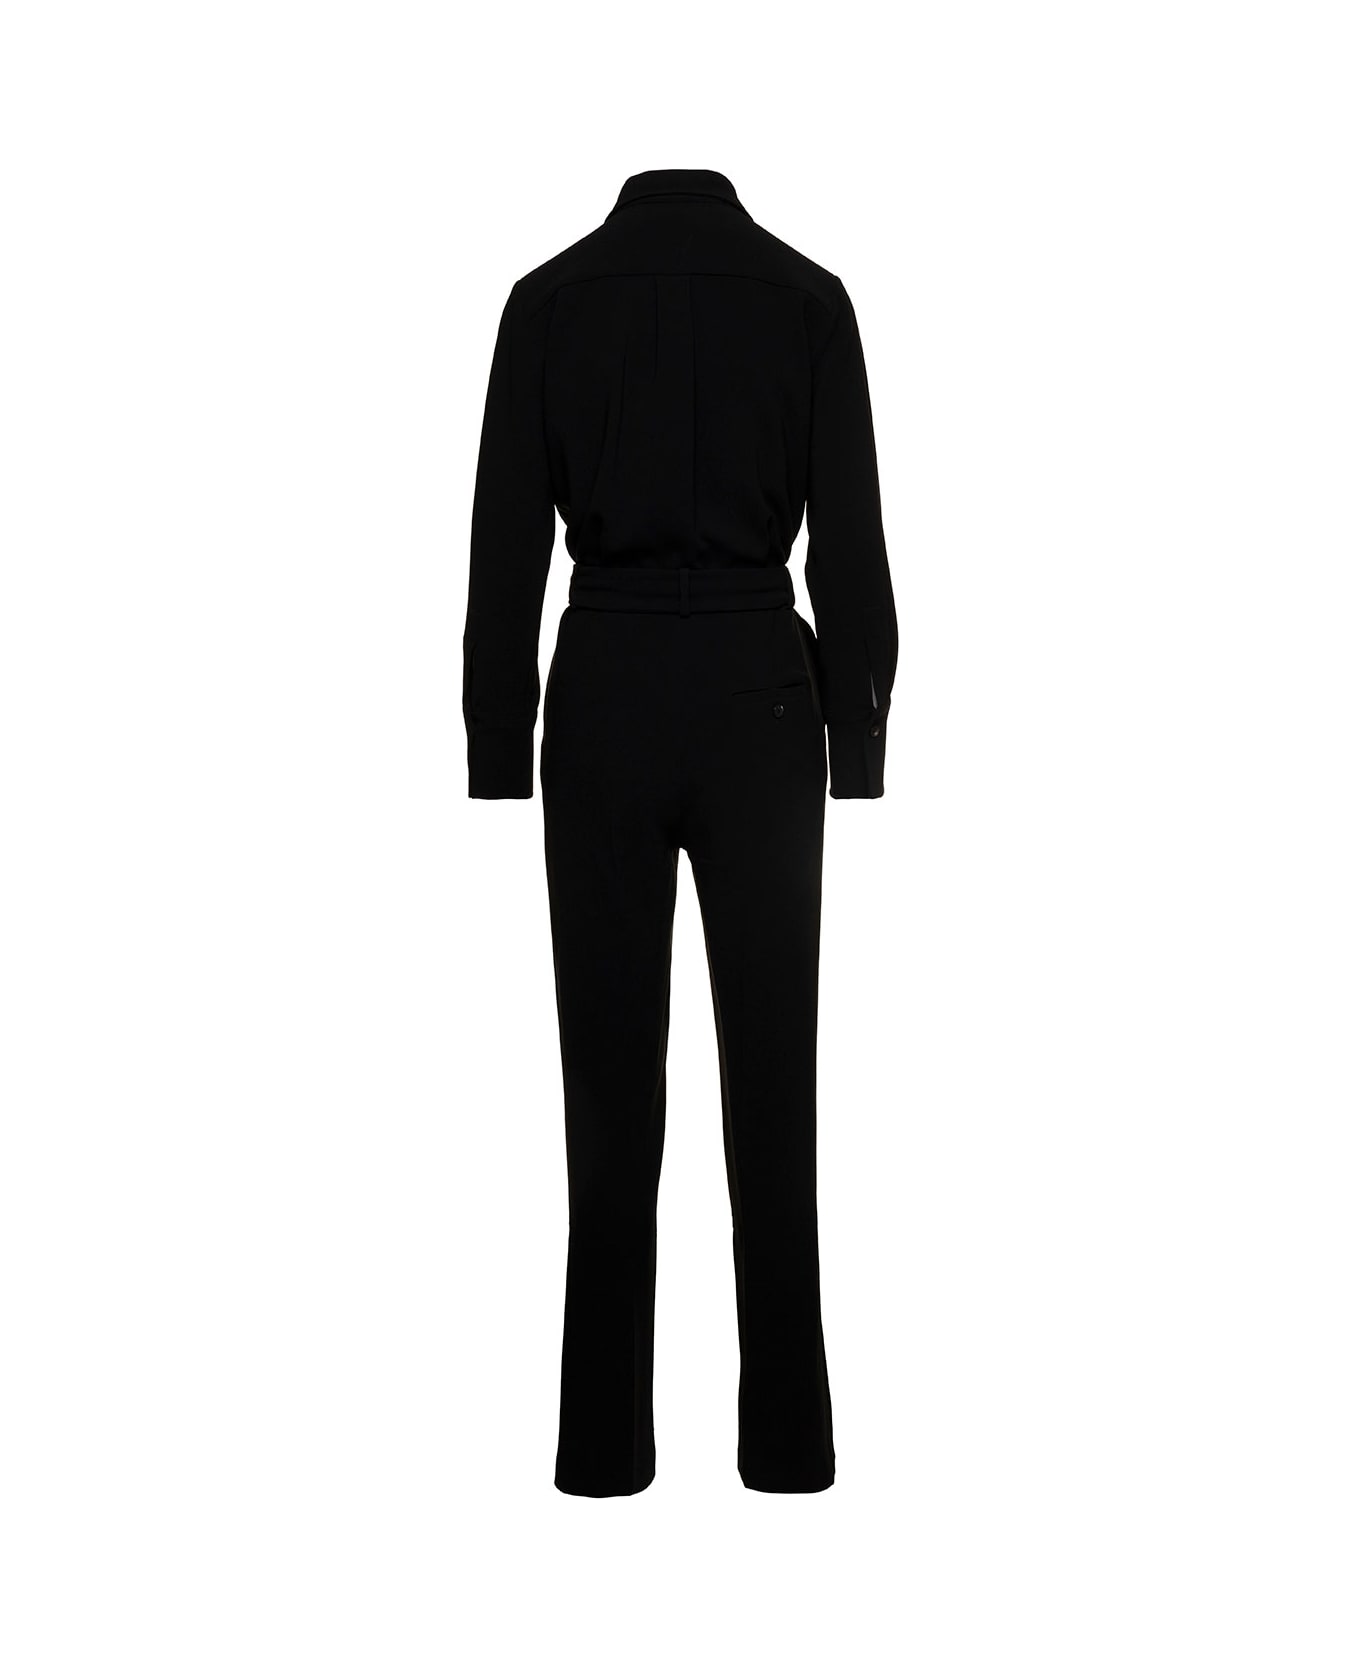 Alberto Biani Black Jumpsuit With Classic Collar And Belt In Triacetate Blend Woman - Black ジャンプスーツ